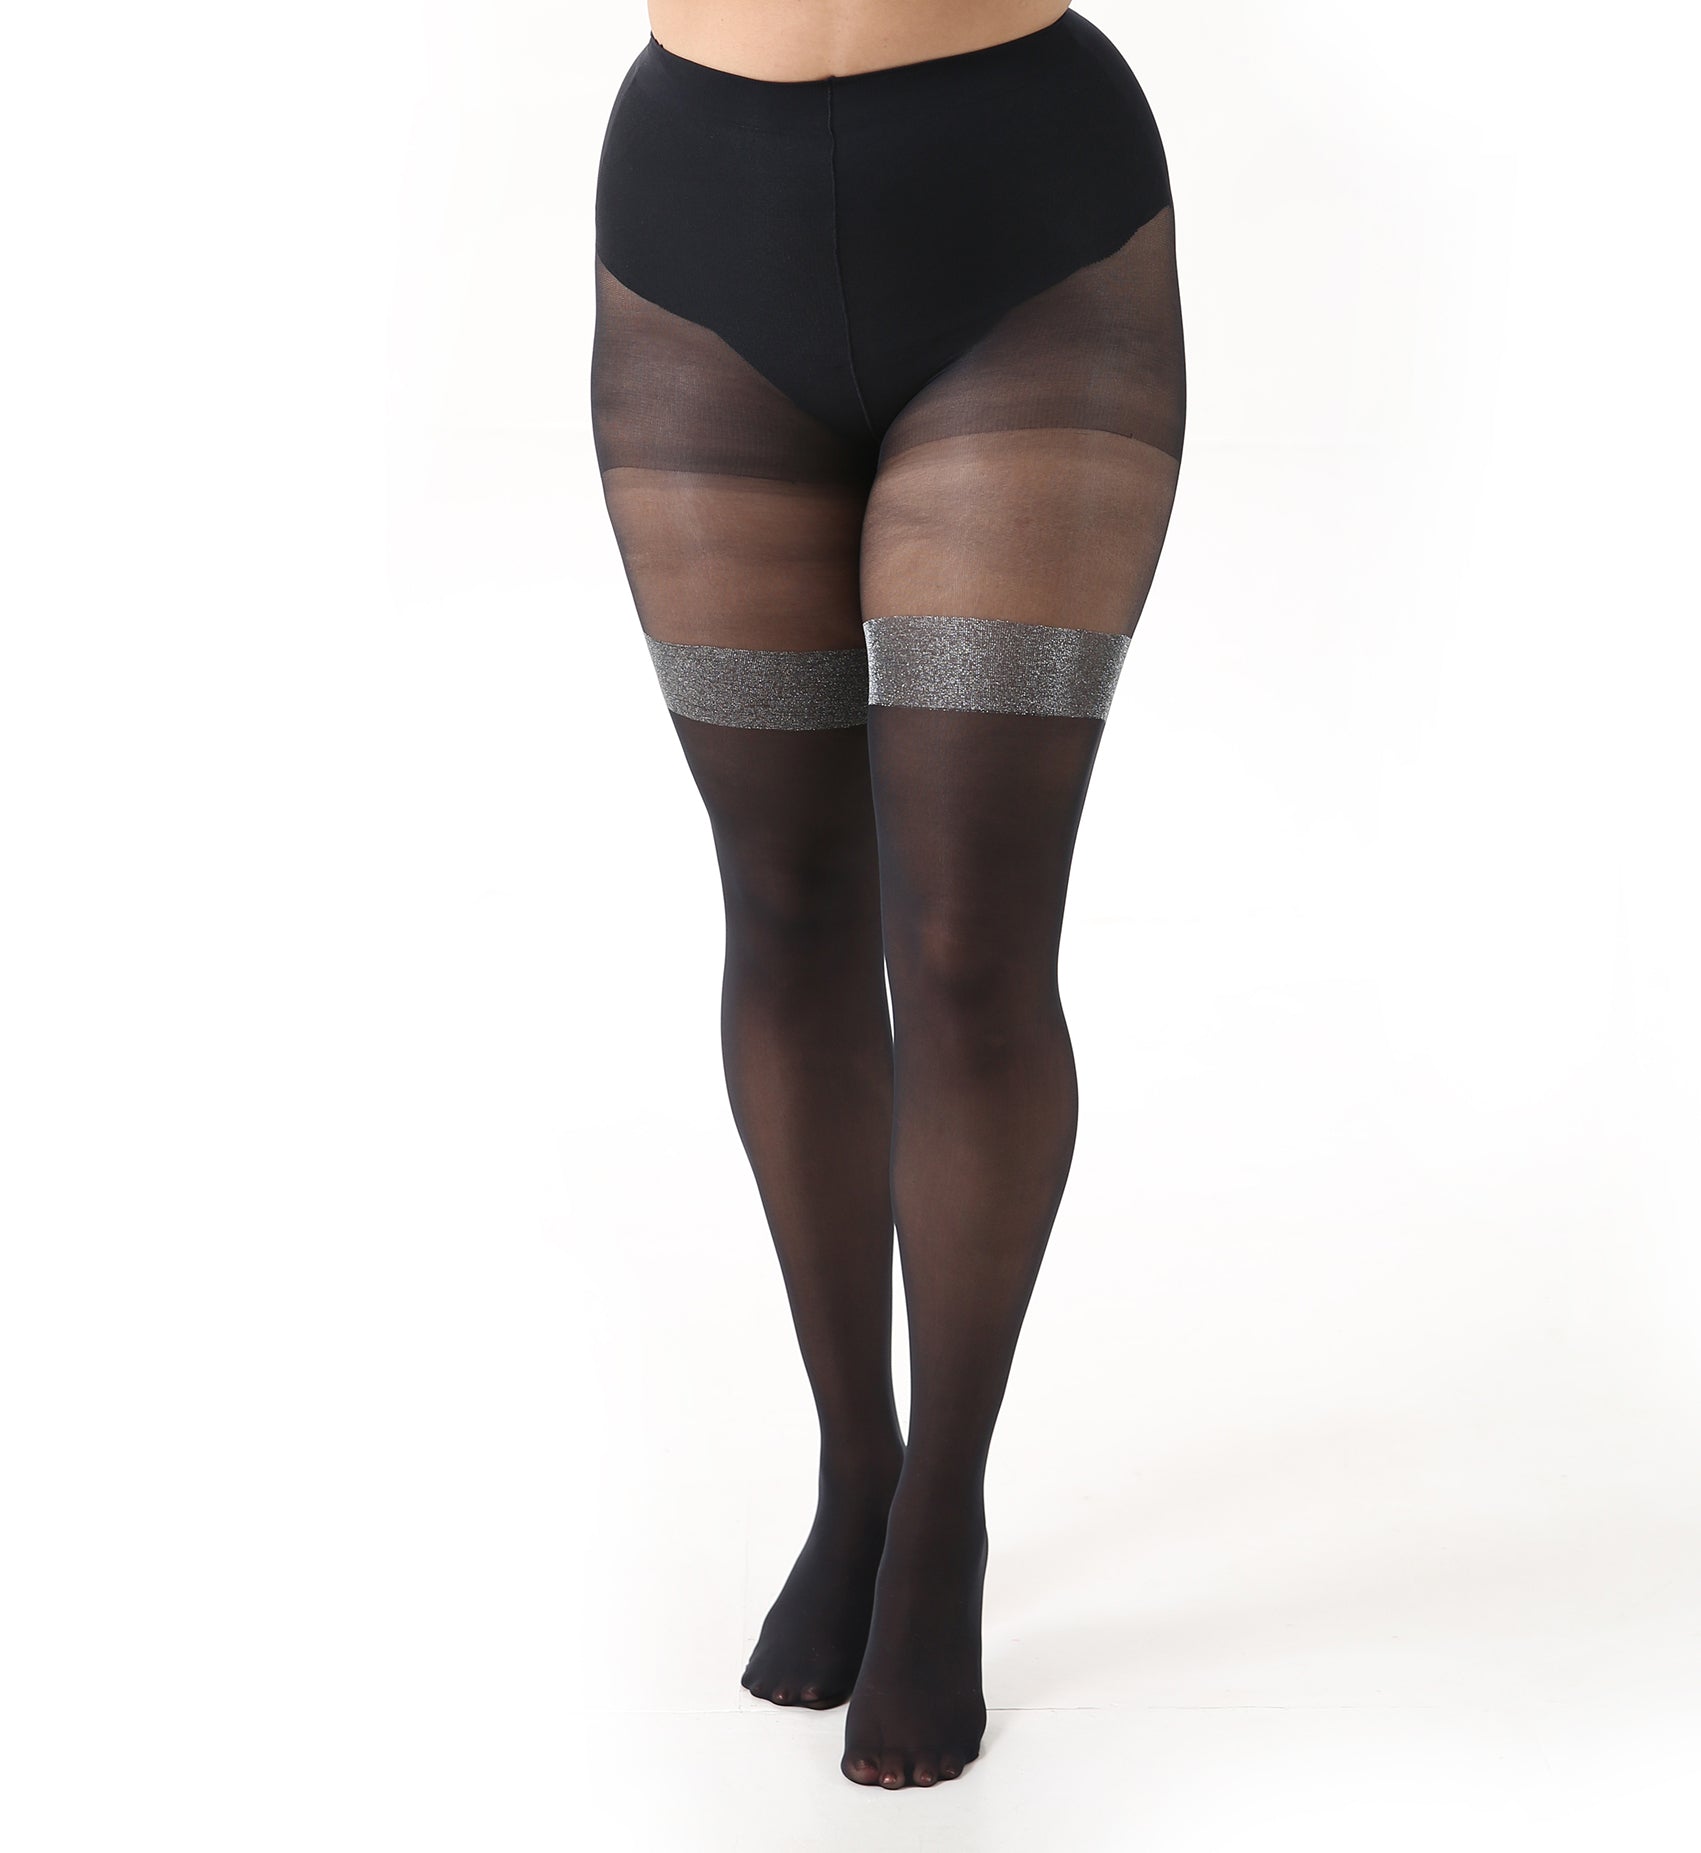 GLITTER SHIMMER TIGHTS, Black With Silver Sparkle, Panyhose Stockings -   Ireland